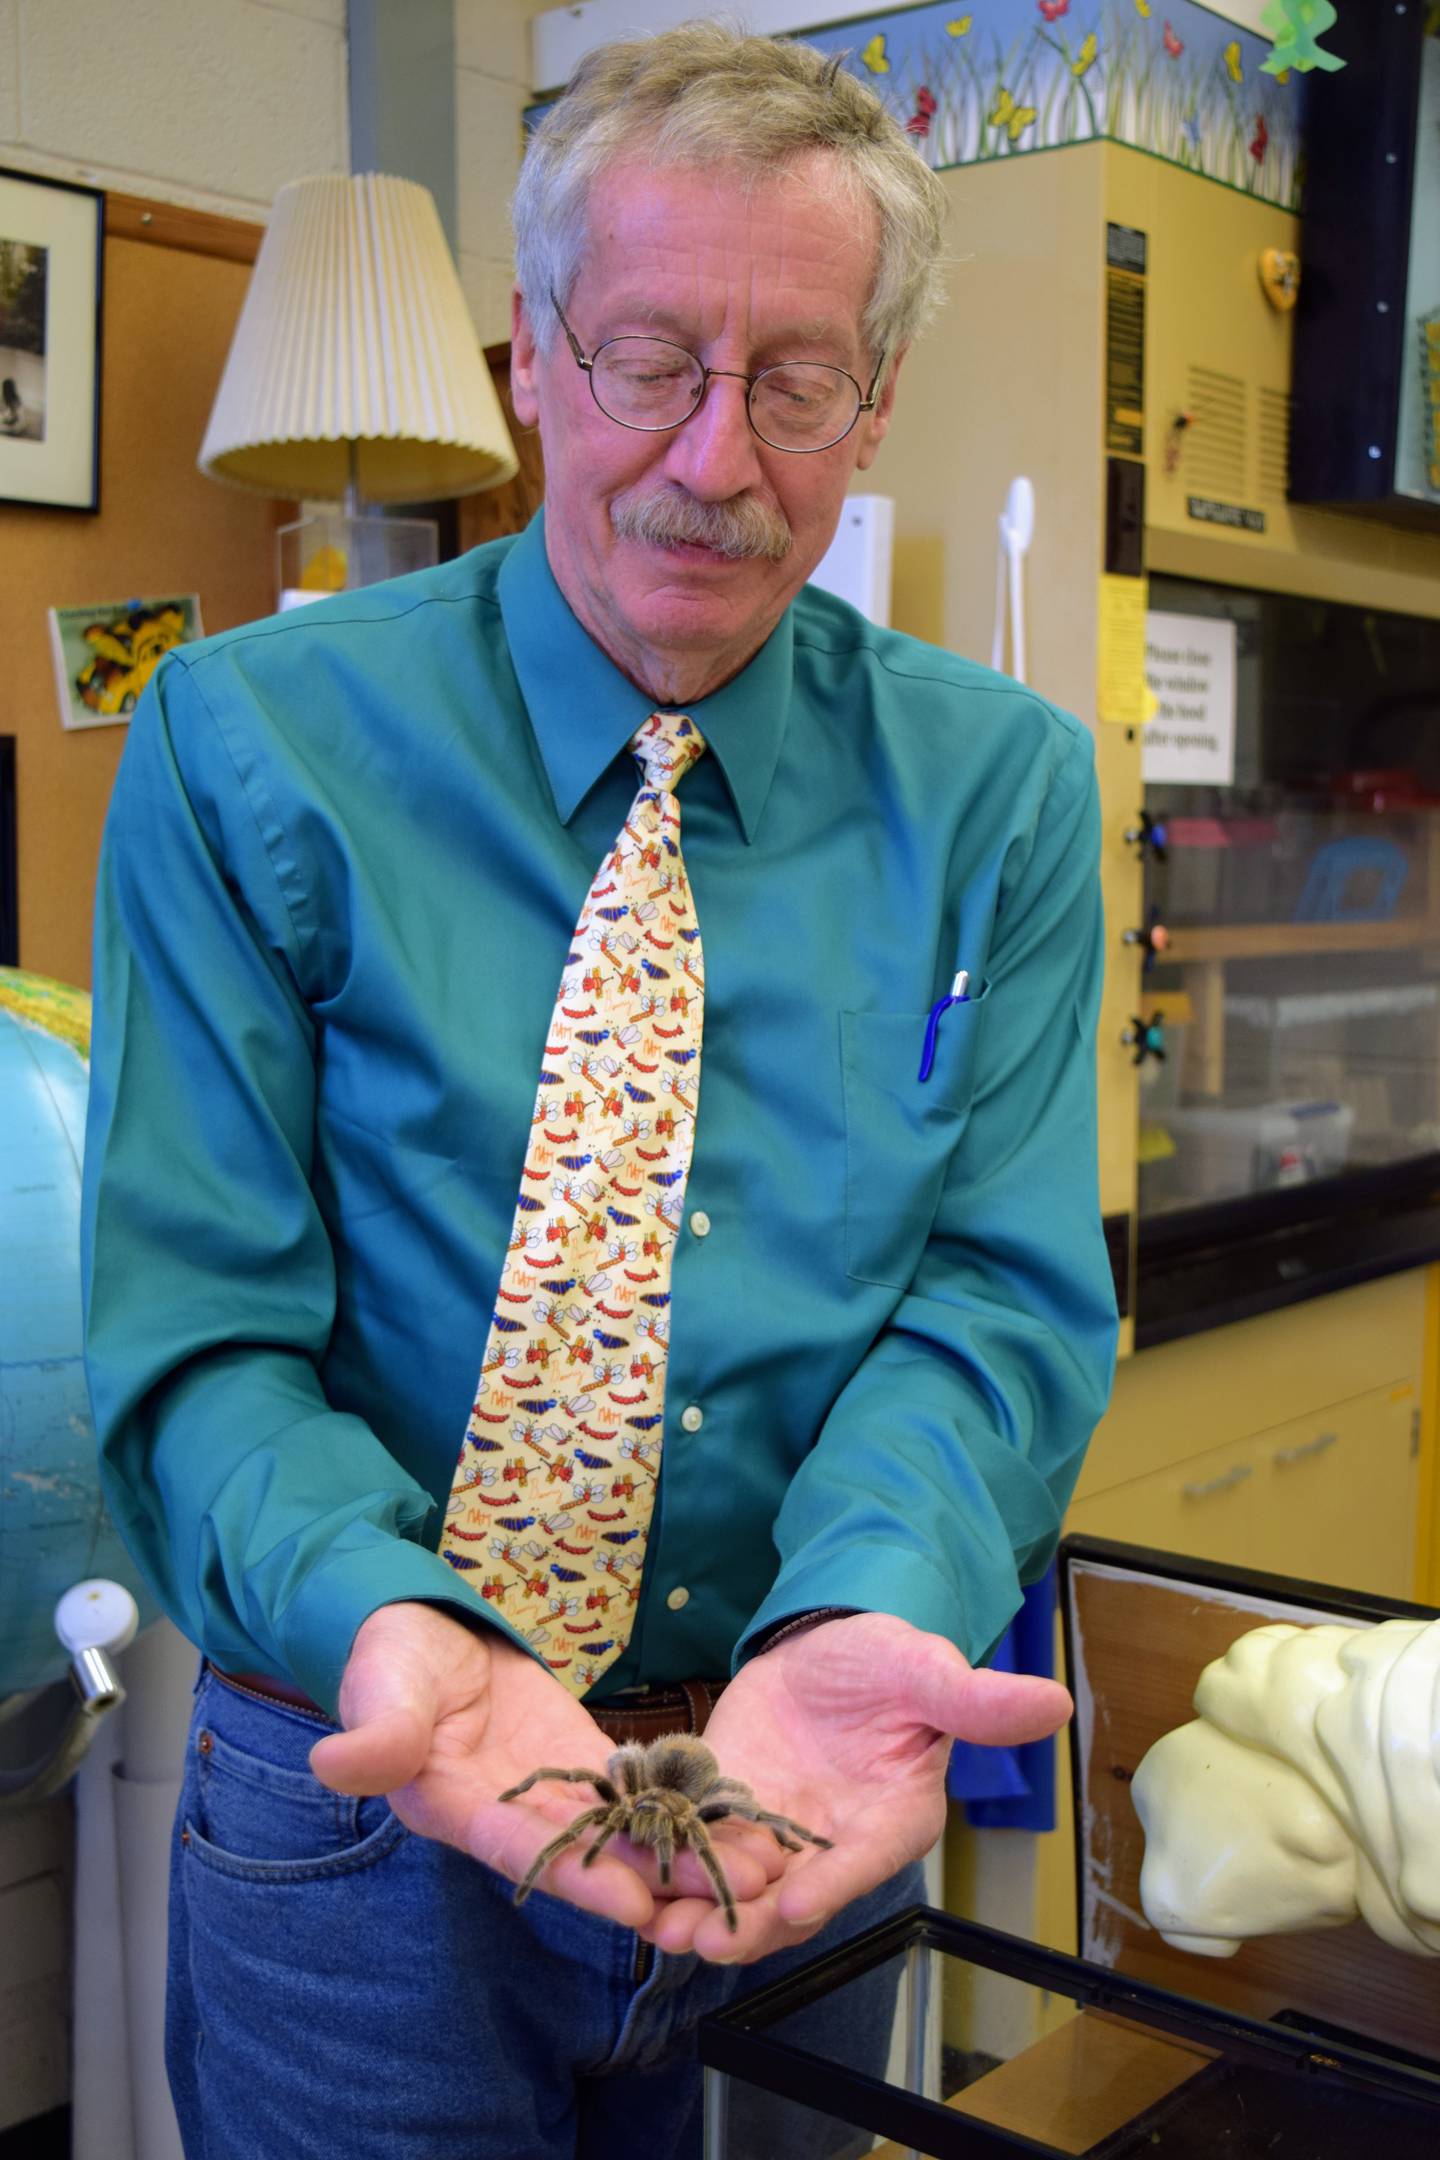 Tom Turpin, now a retired entomology professor, holds a tarantula at Purdue University. Entomologists study and research insects and their behavior. This is especially important in the agriculture industry, where beneficial insects, pollinators and pests affect yields every year.